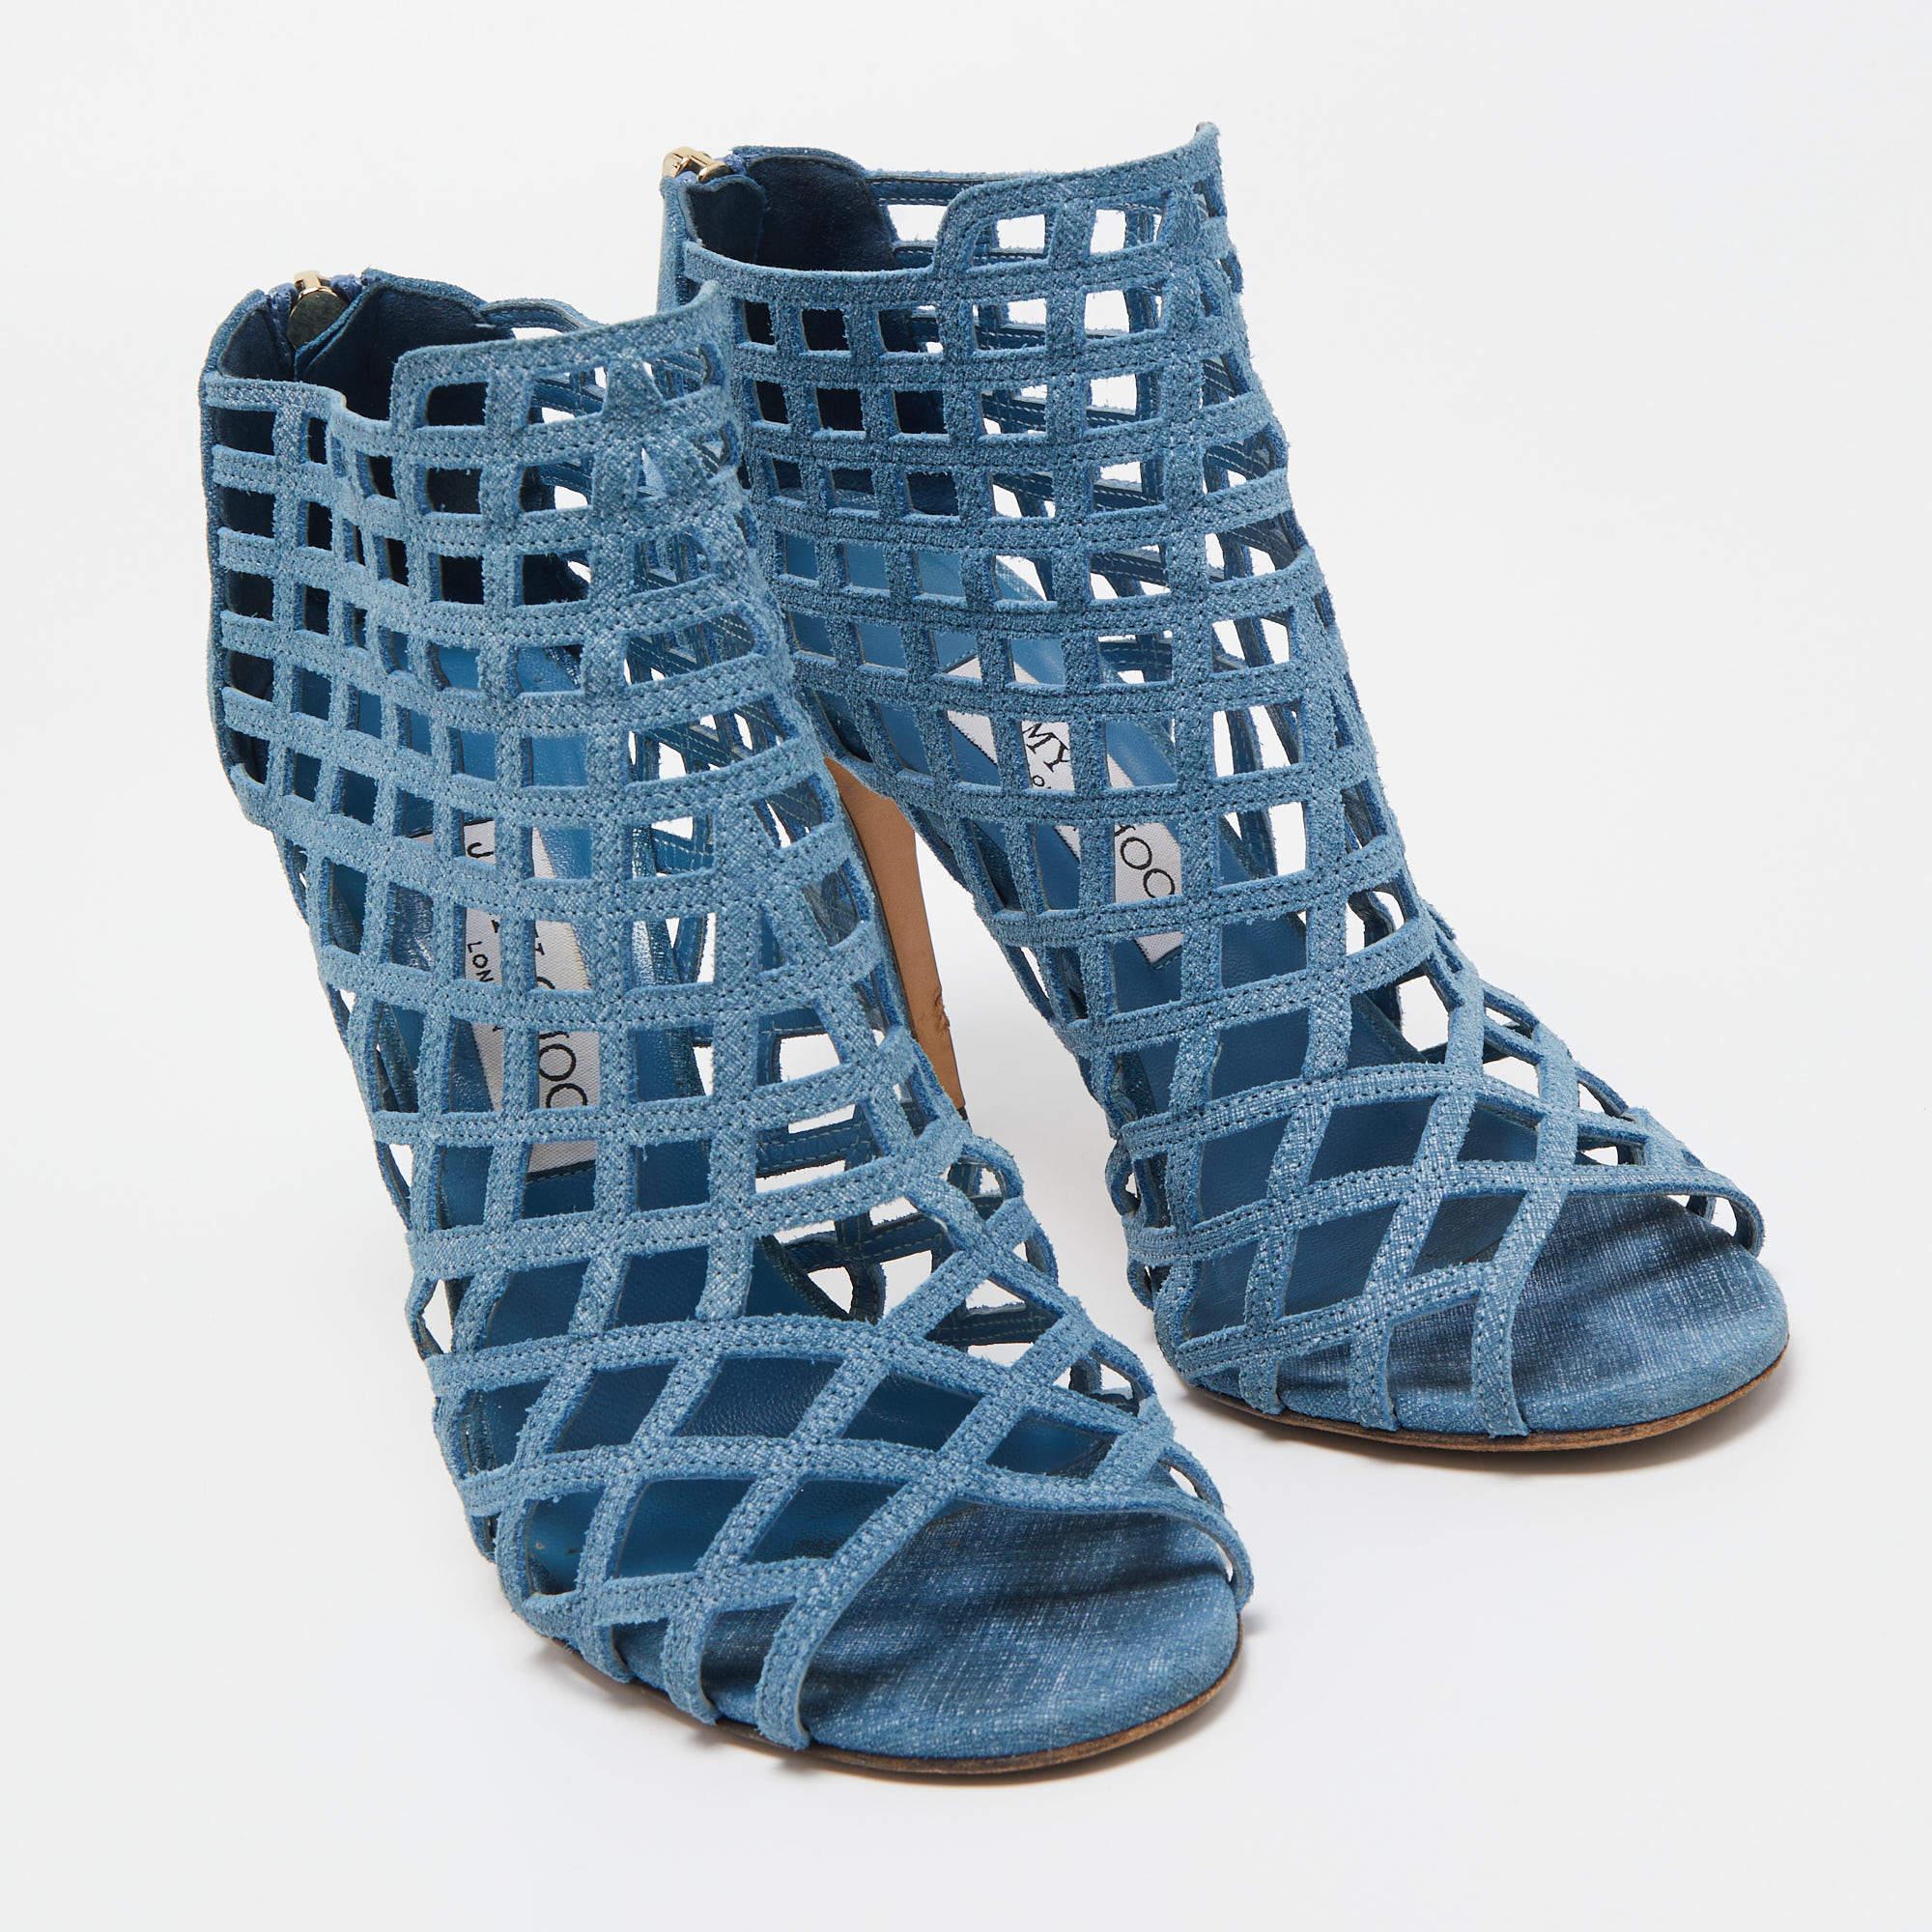 Jimmy Choo Blue Textured Suede Dassa Caged Booties Size 37 In Good Condition For Sale In Dubai, Al Qouz 2